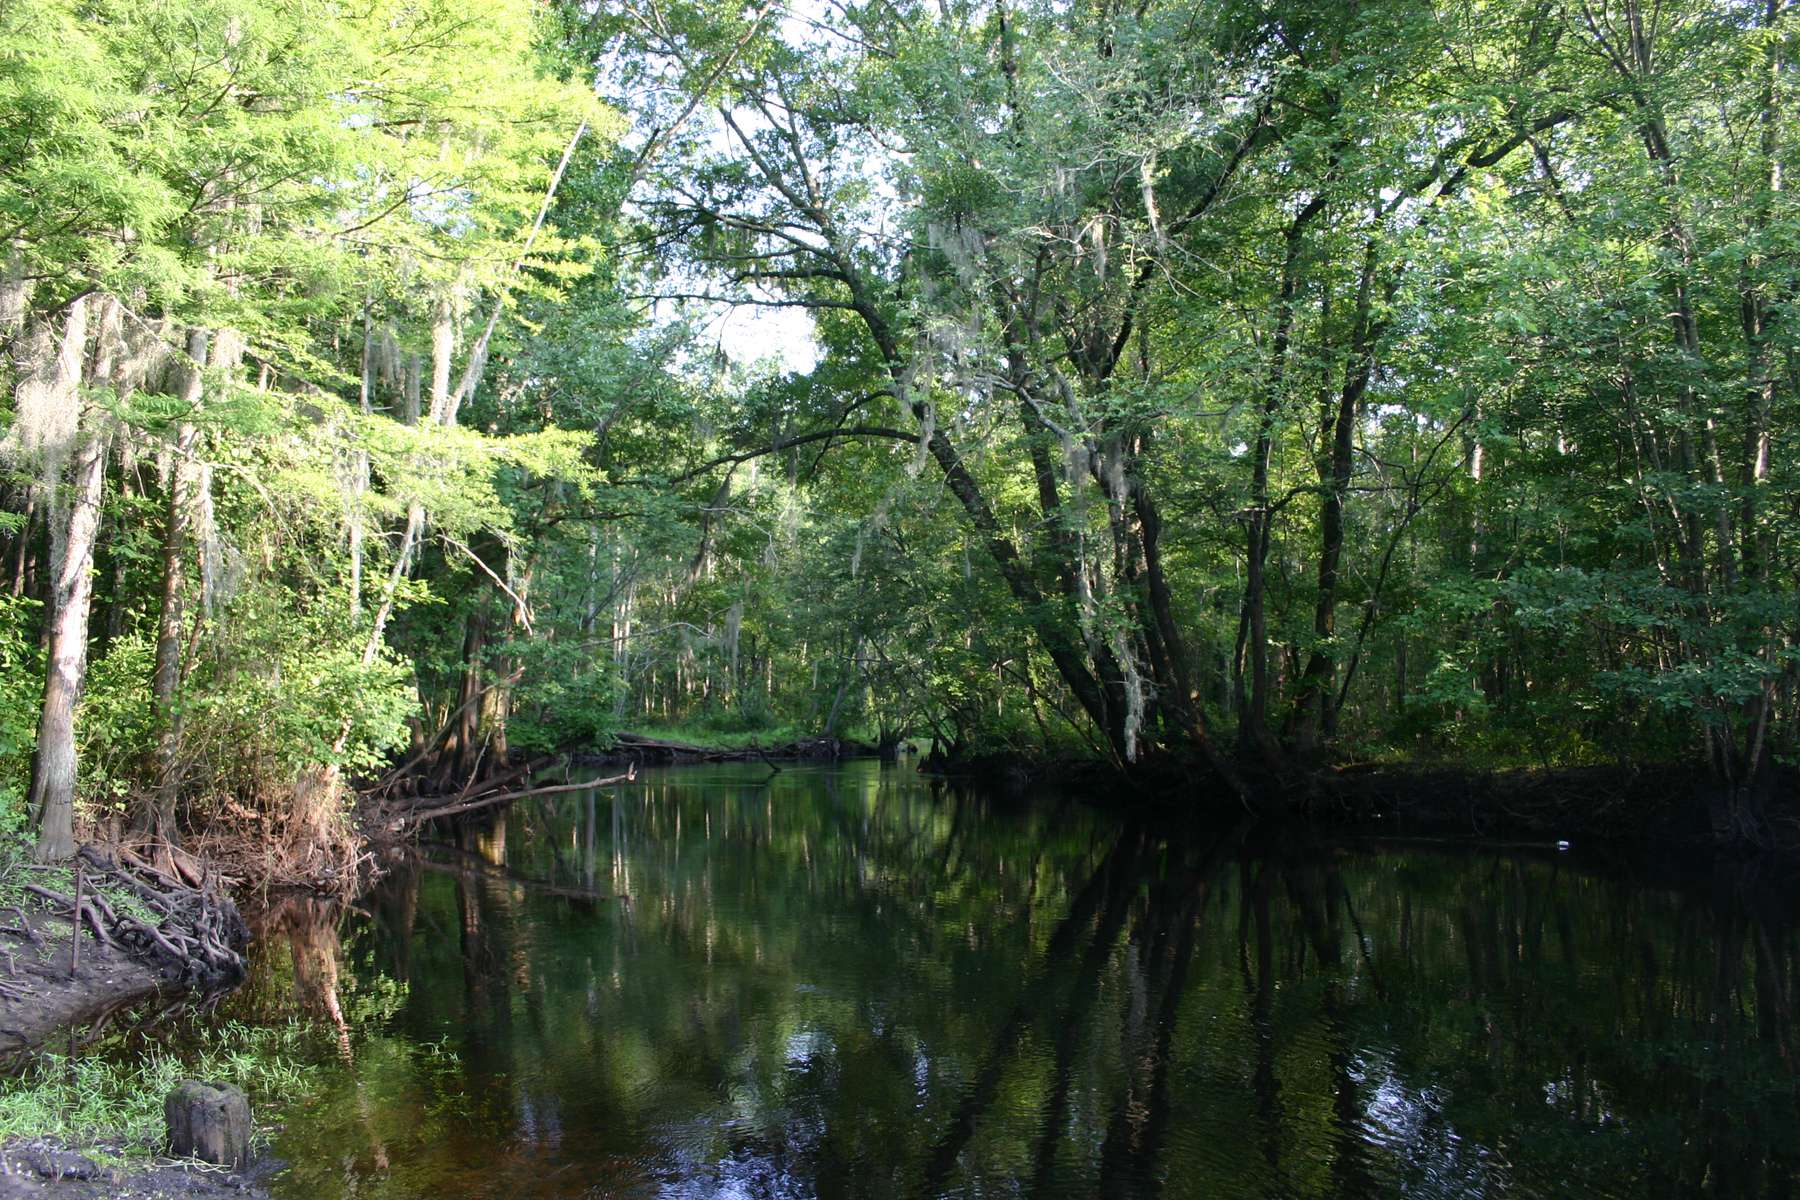 Southern Division â Pee Dee River Basin
Georgetown, S.C.
April 22-24, 2015